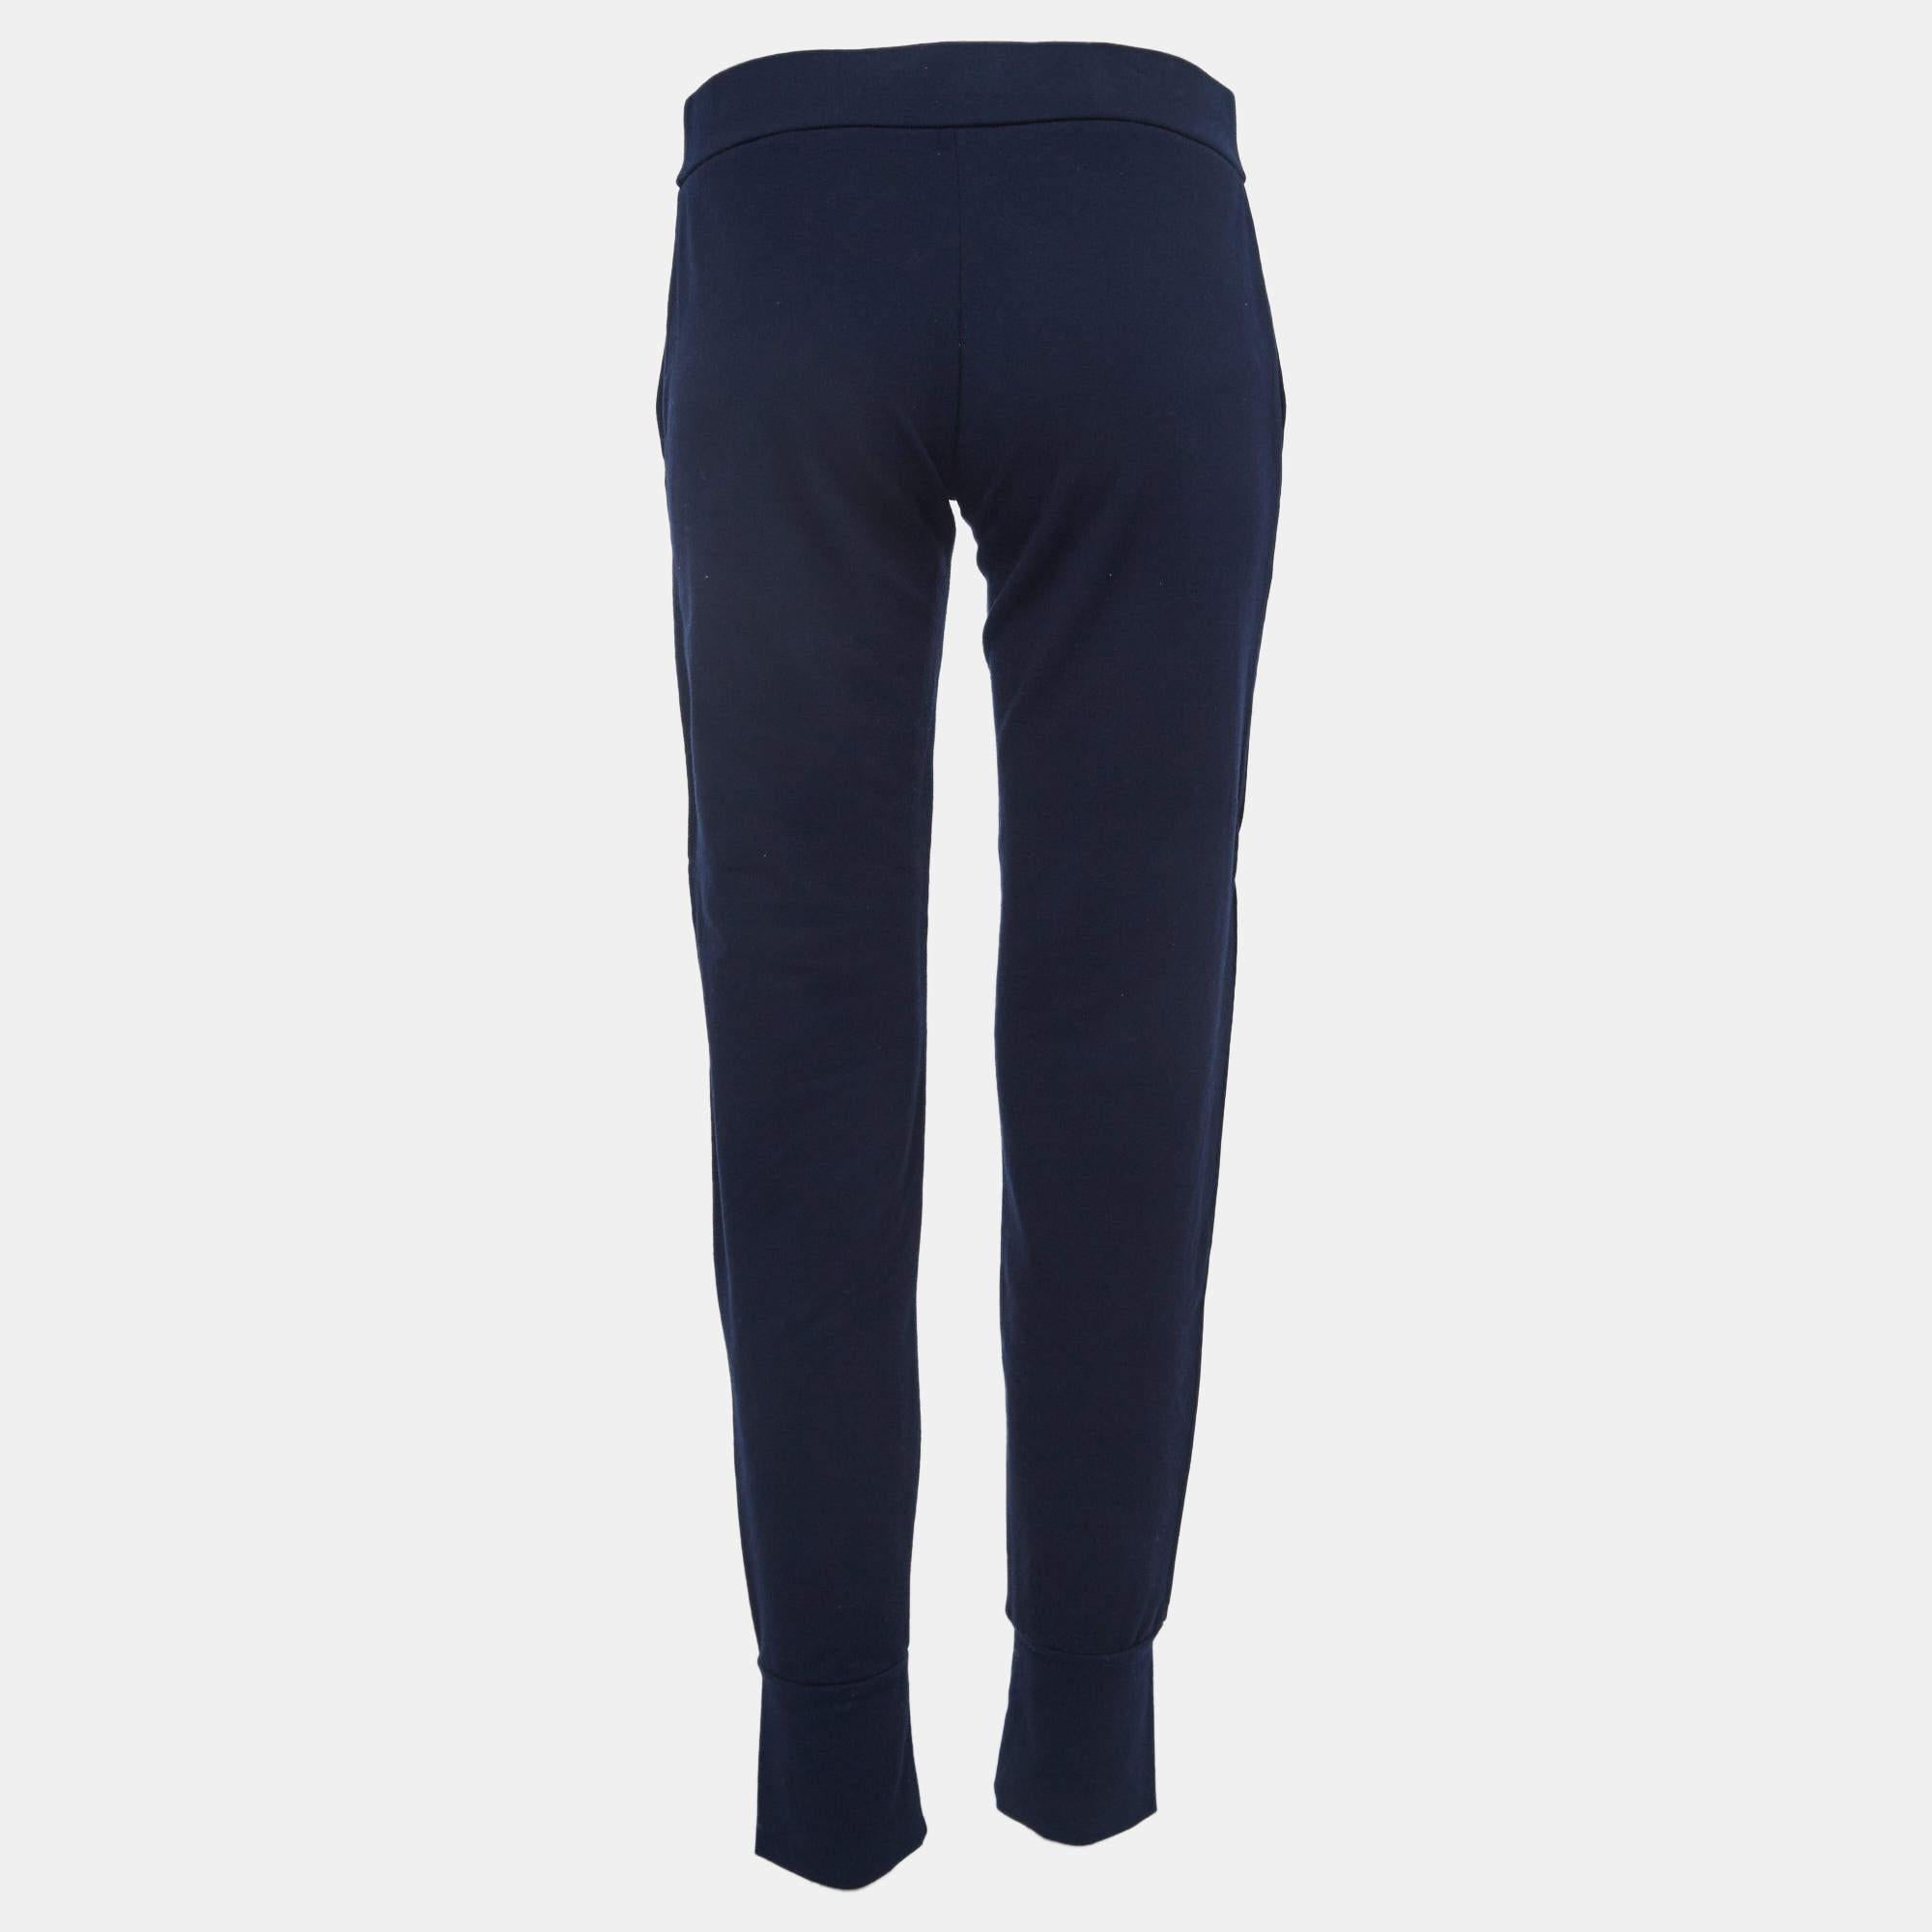 Step out for a jog with these super-stylish jogger pants, lounge around, or go out to run errands, the creation will make you feel comfortable all day. It has been made using high-grade materials and will go well with sneakers, t-shirts, or